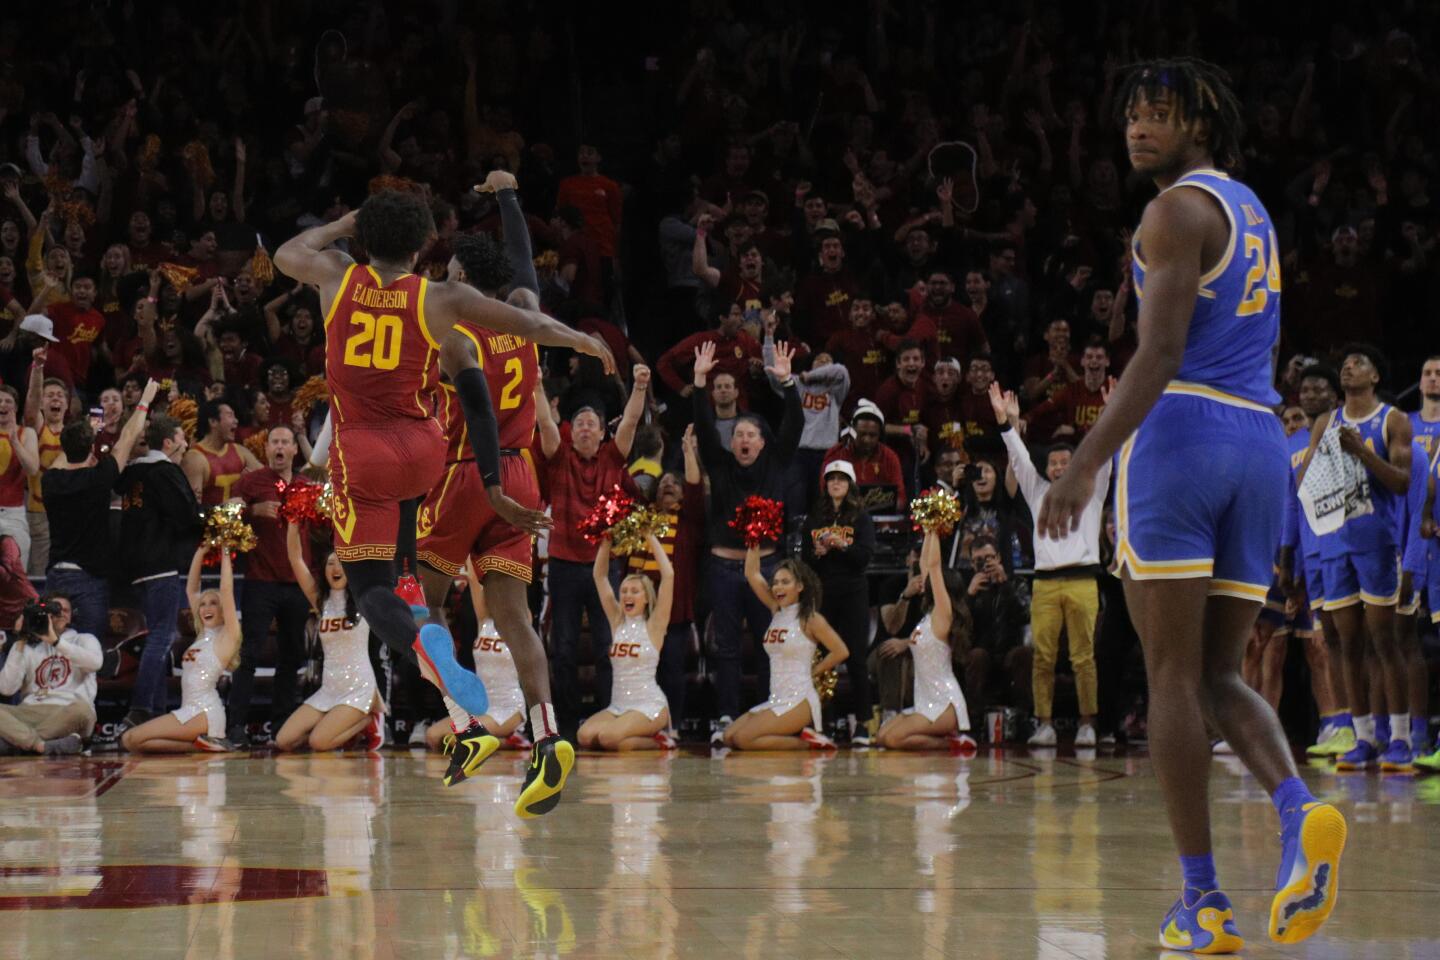 USC guard Jonah Mathews celebrates with teammate Ethan Anderson as UCLA's Jalen Hill looks at the scoreboard in the final moments of the Trojans' 54-52 victory at Galen Center on March 7, 2020.